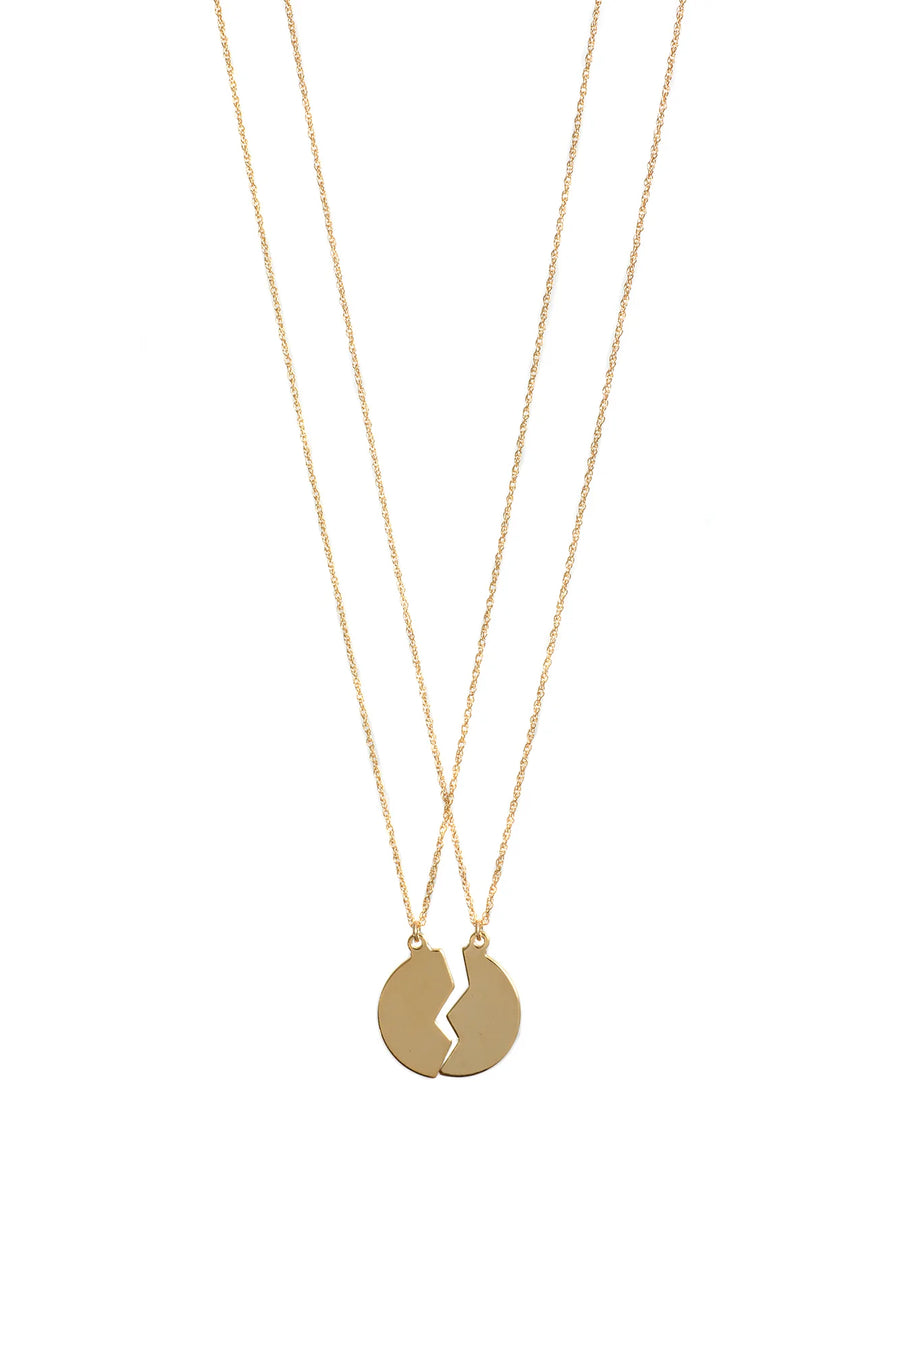 LISBETH JEWELRY - DUO BFF NECKLACE - GOLD FILL